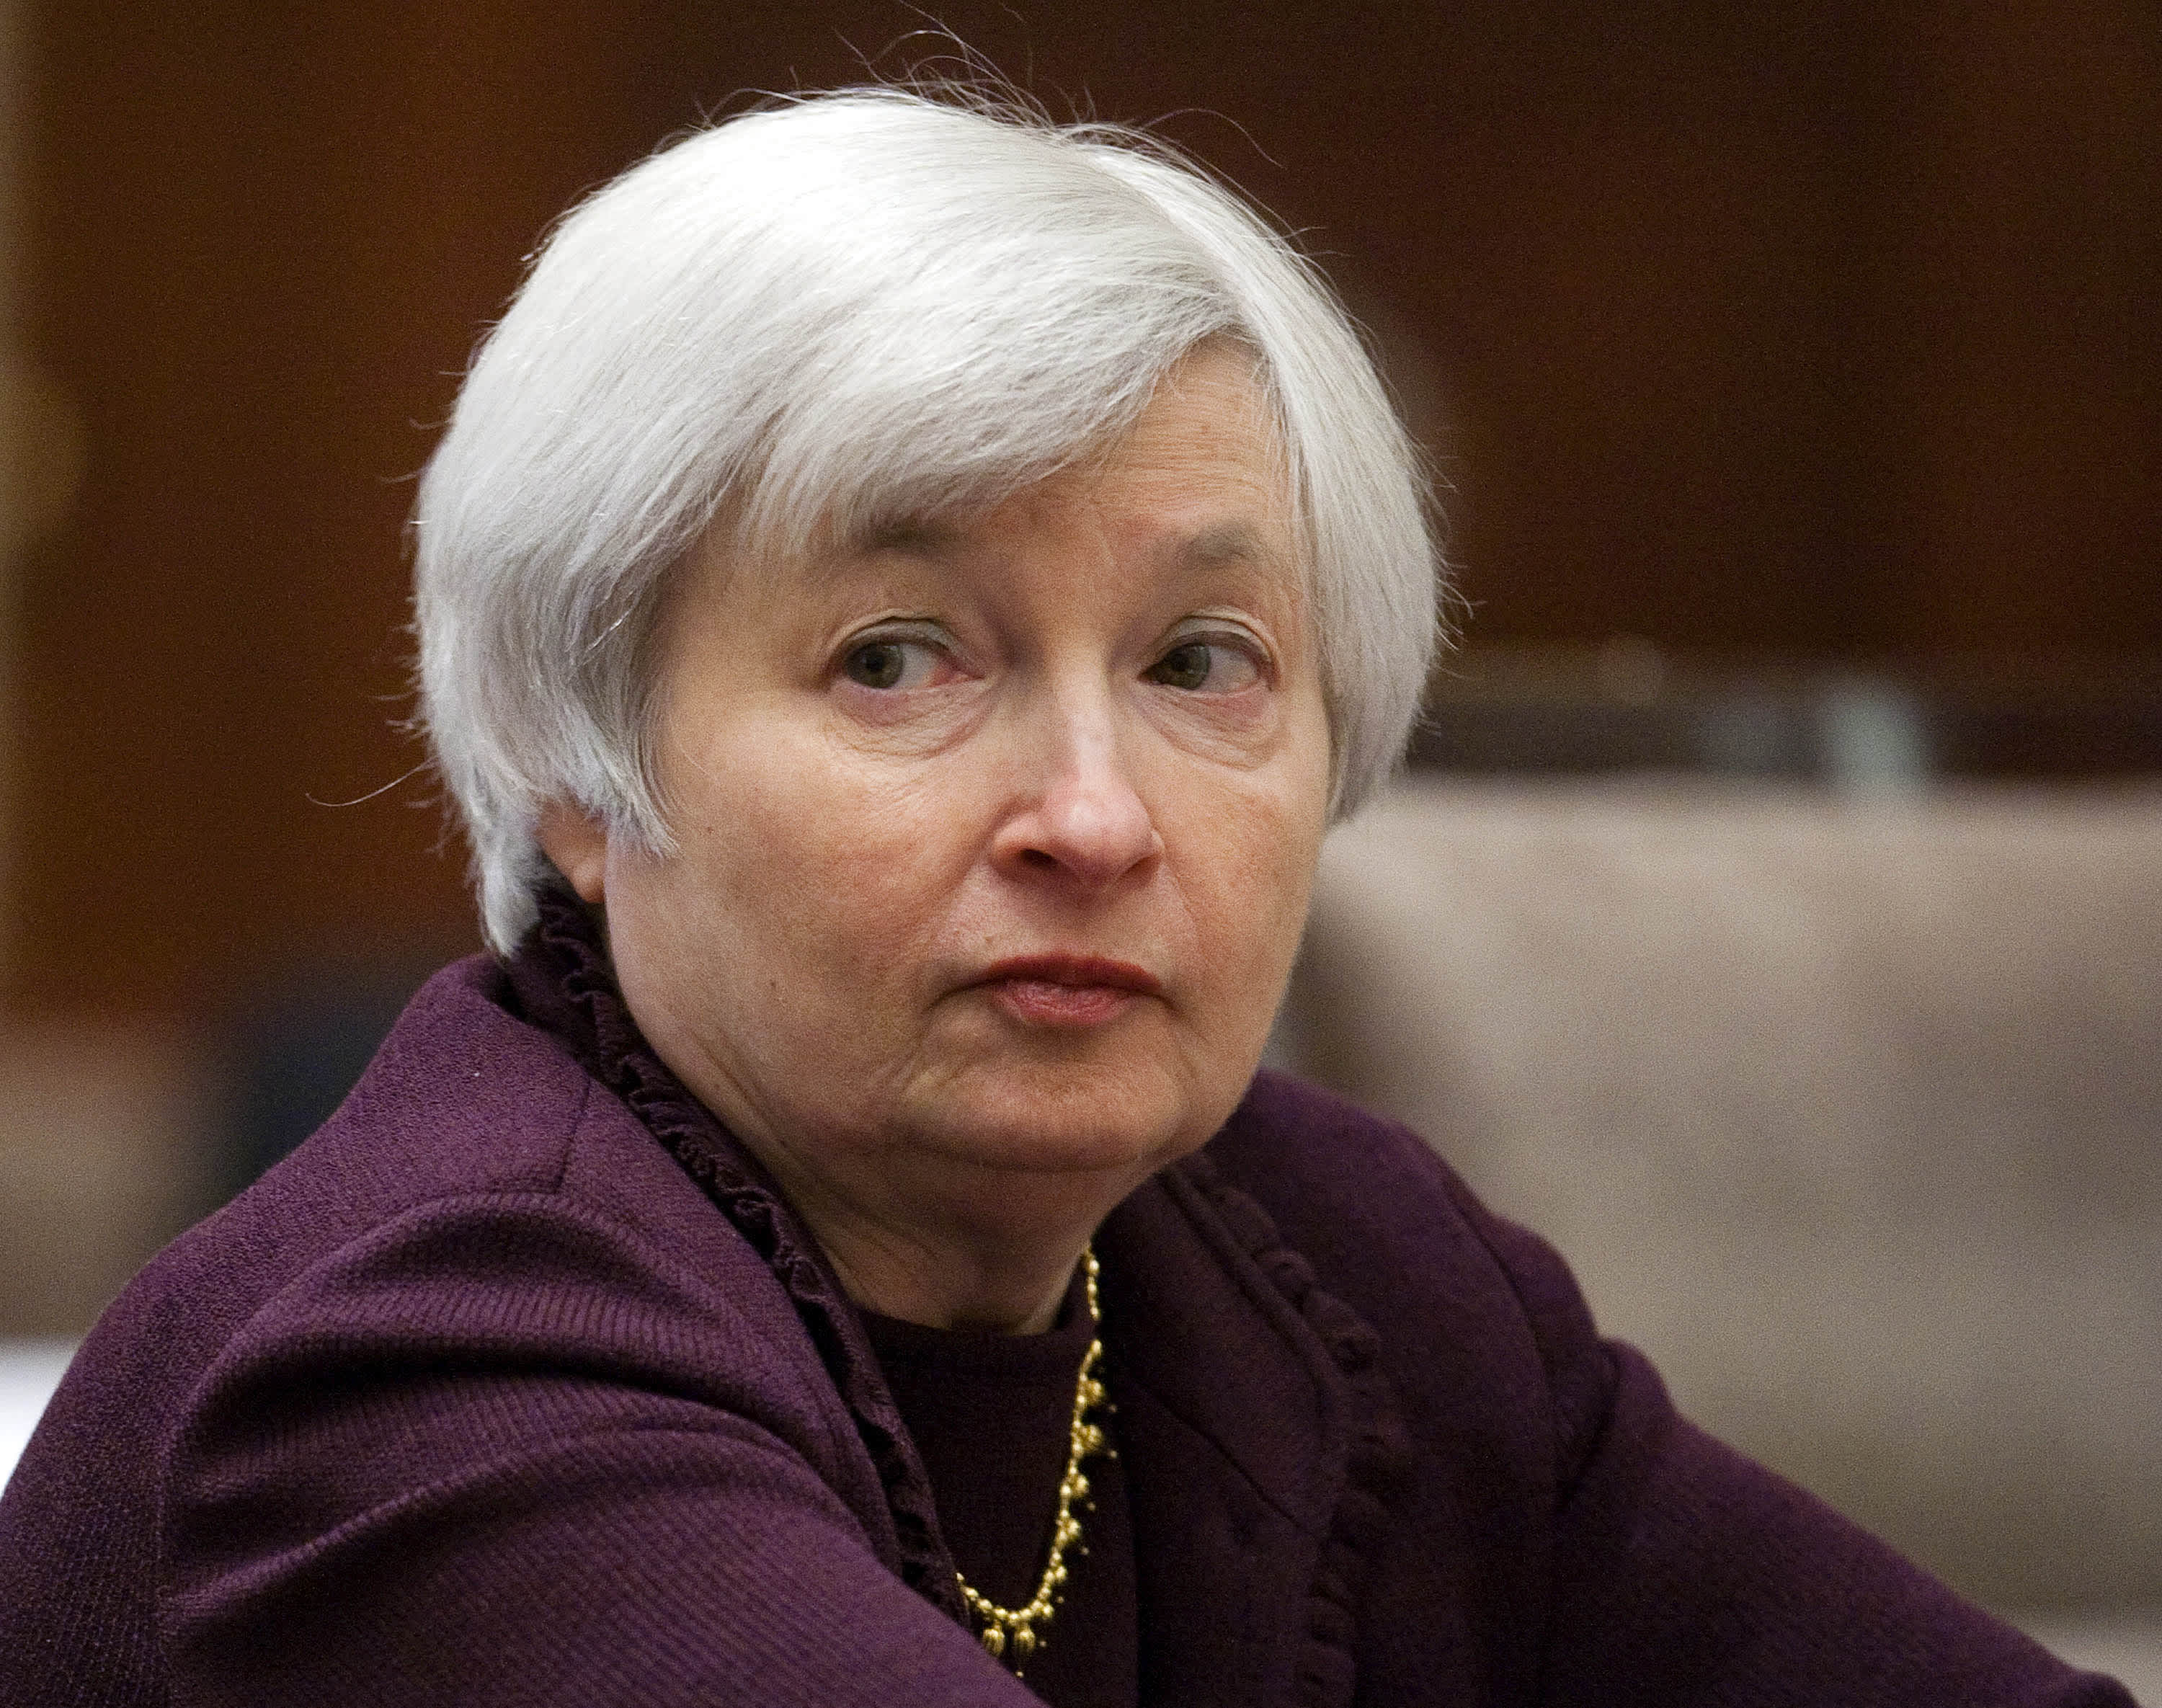 What Janet Yellen’s success means for women